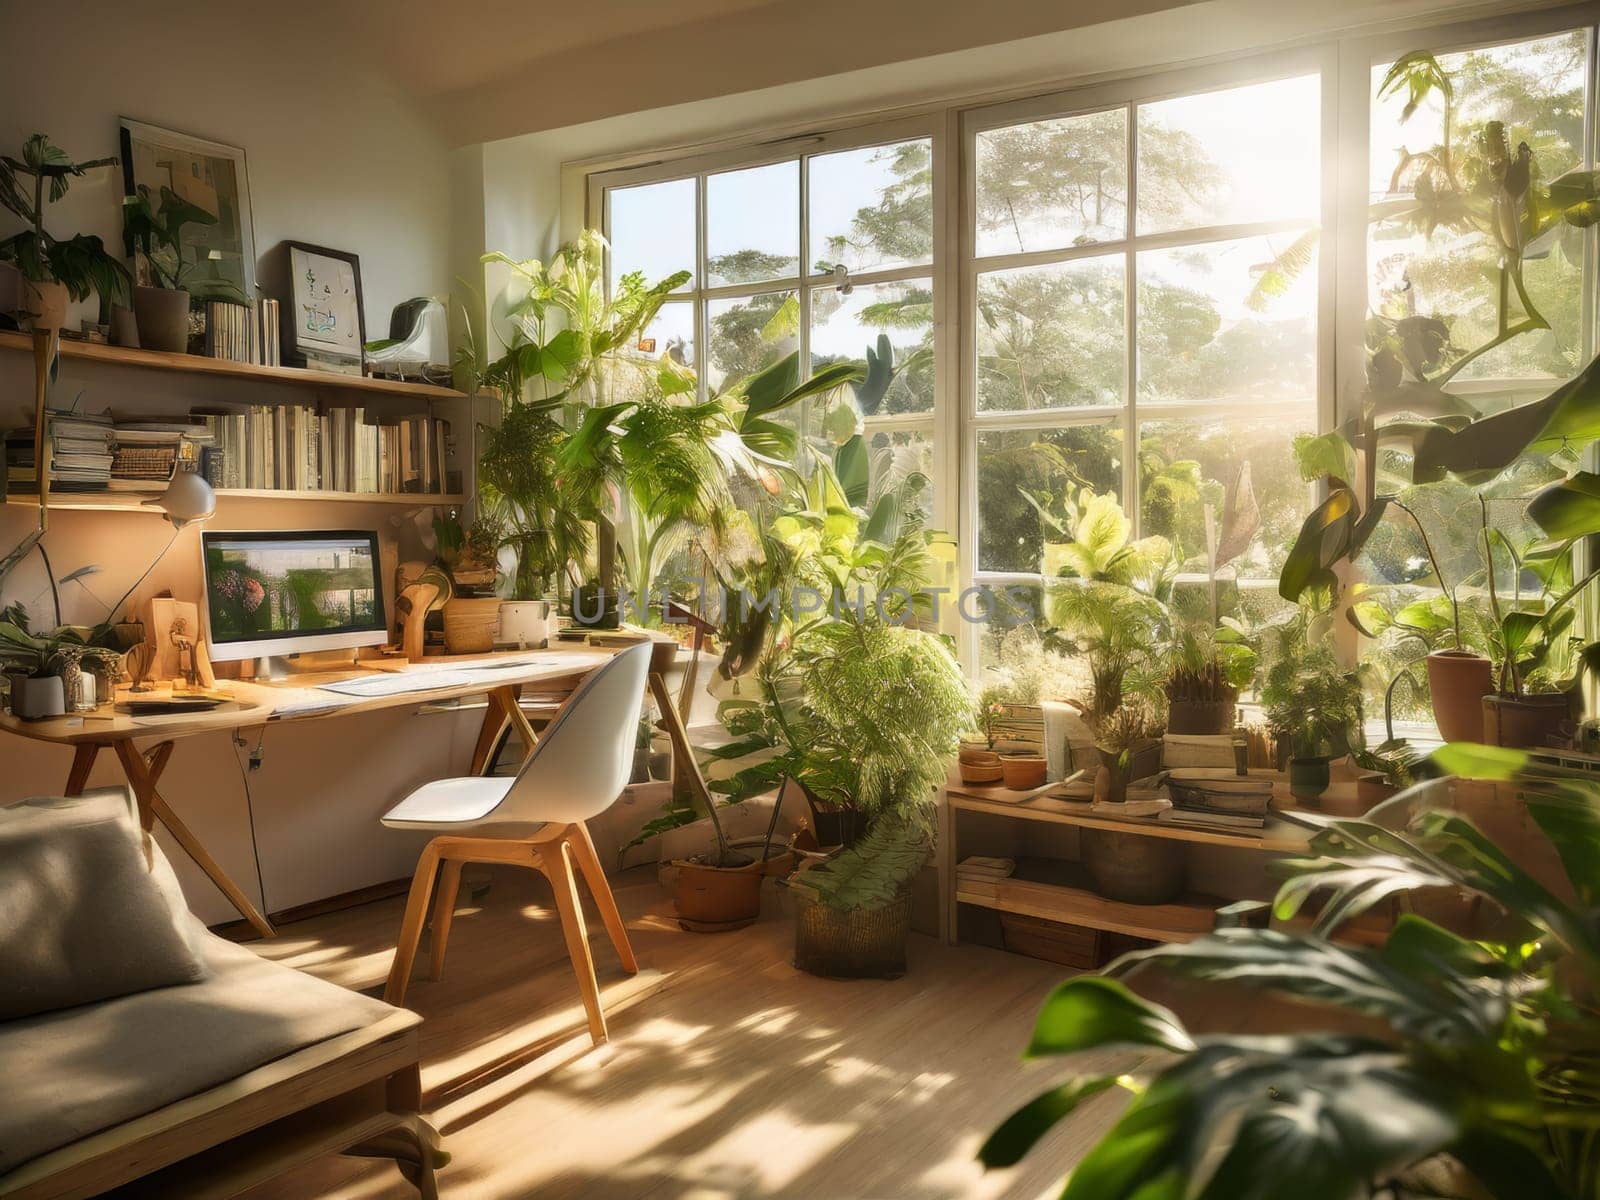 Urban jungle in living room interior. Scandinavian and boho style room interior with many natural potted plants.